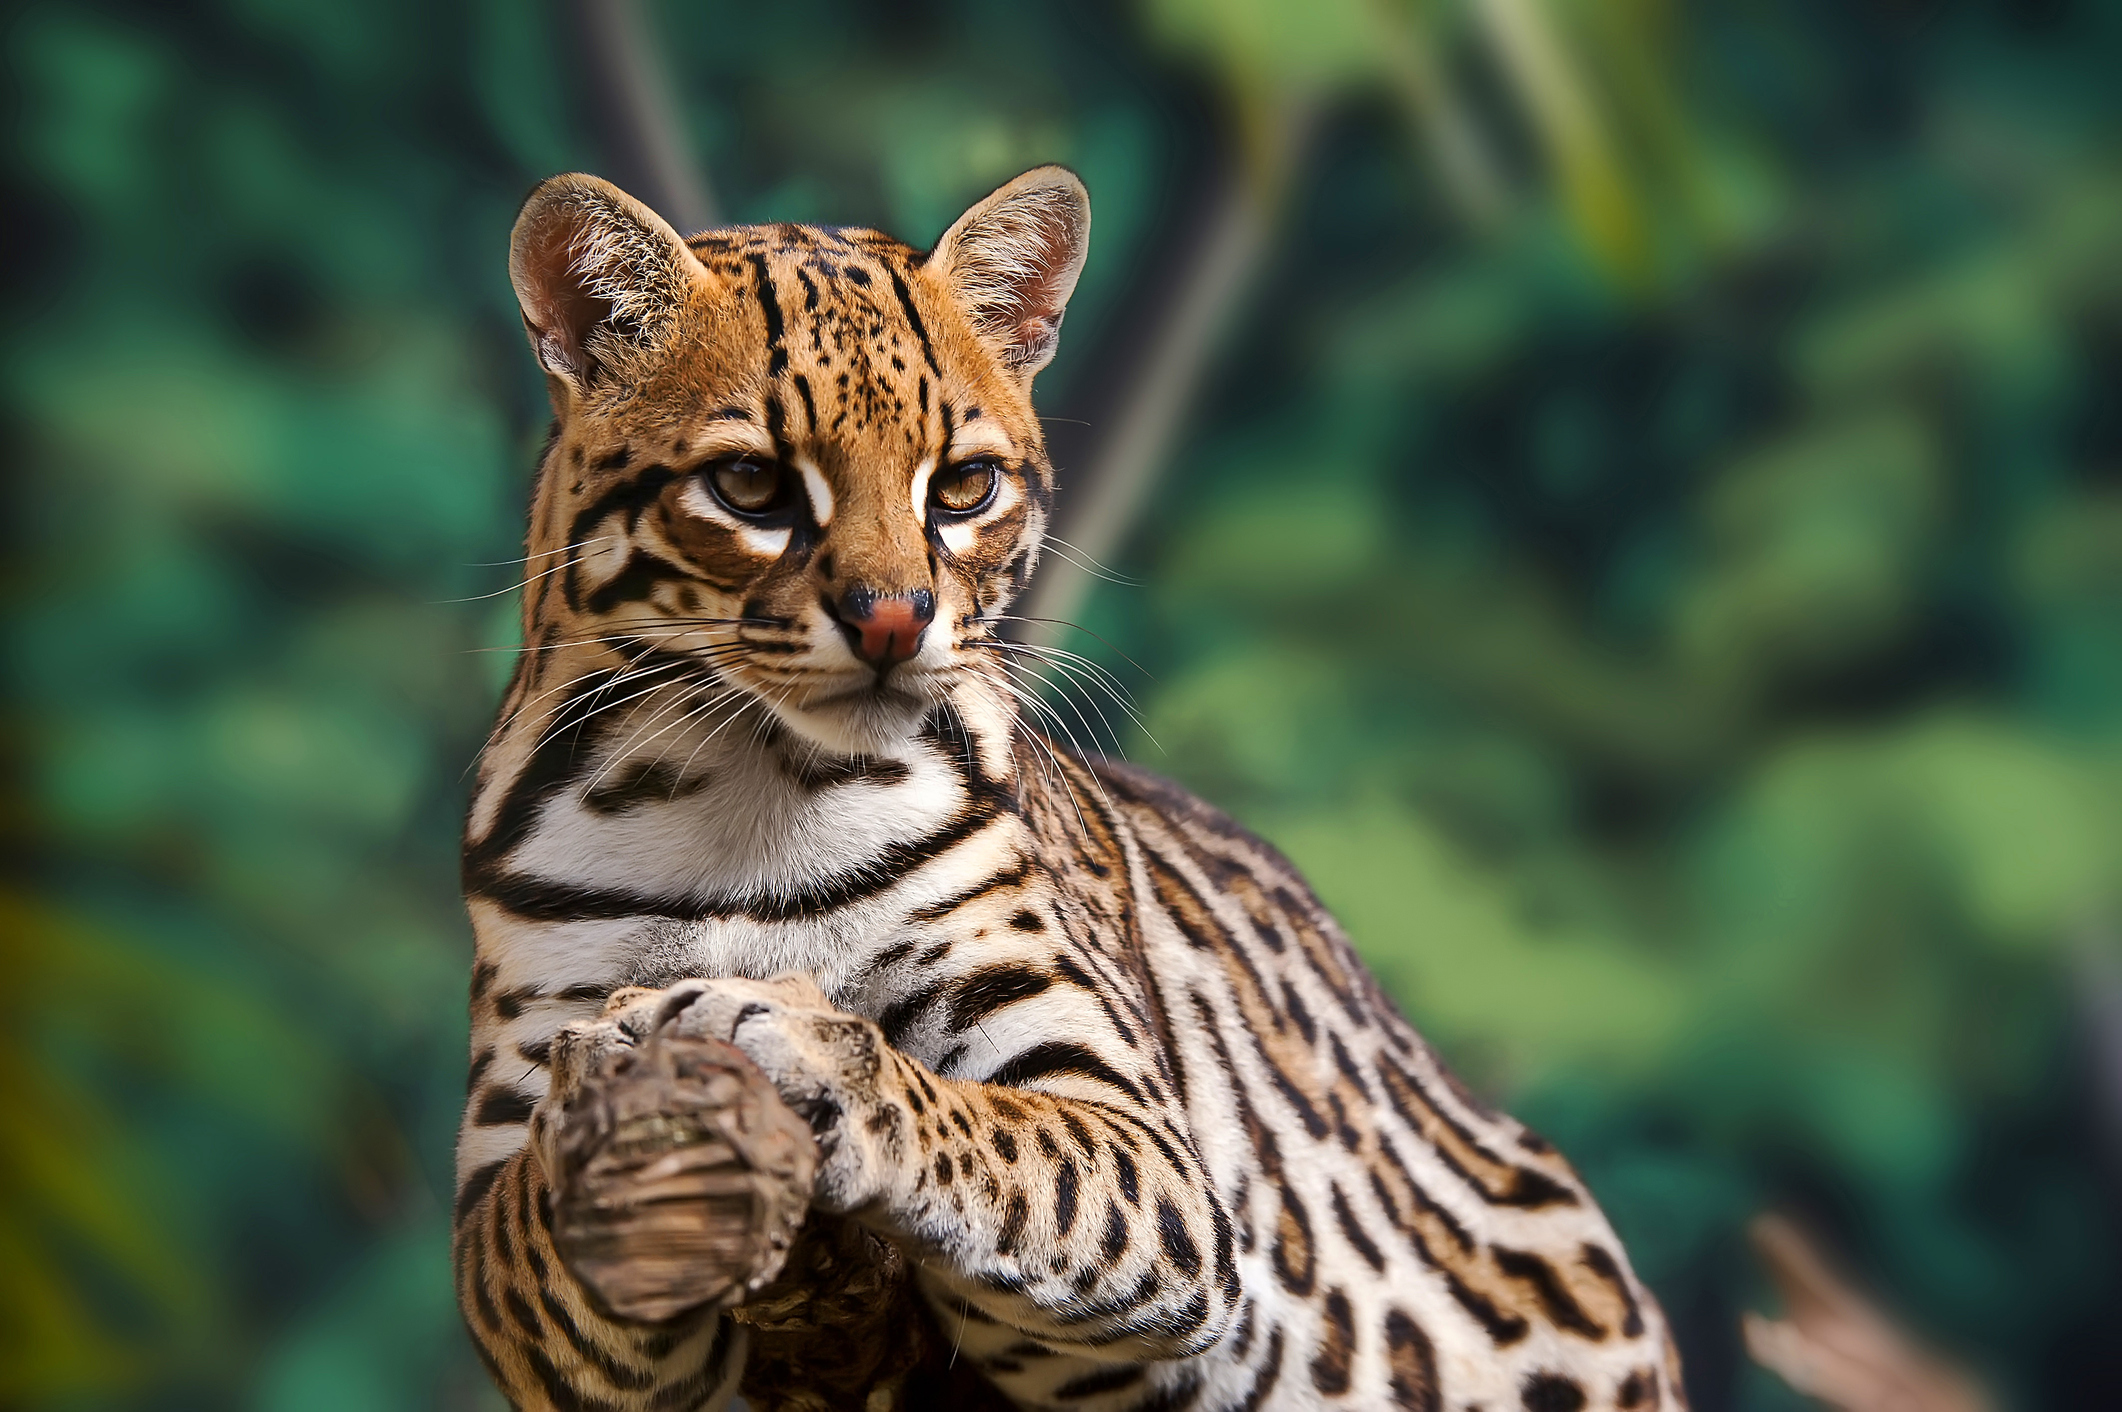 Ocelots Are Nocturnal.